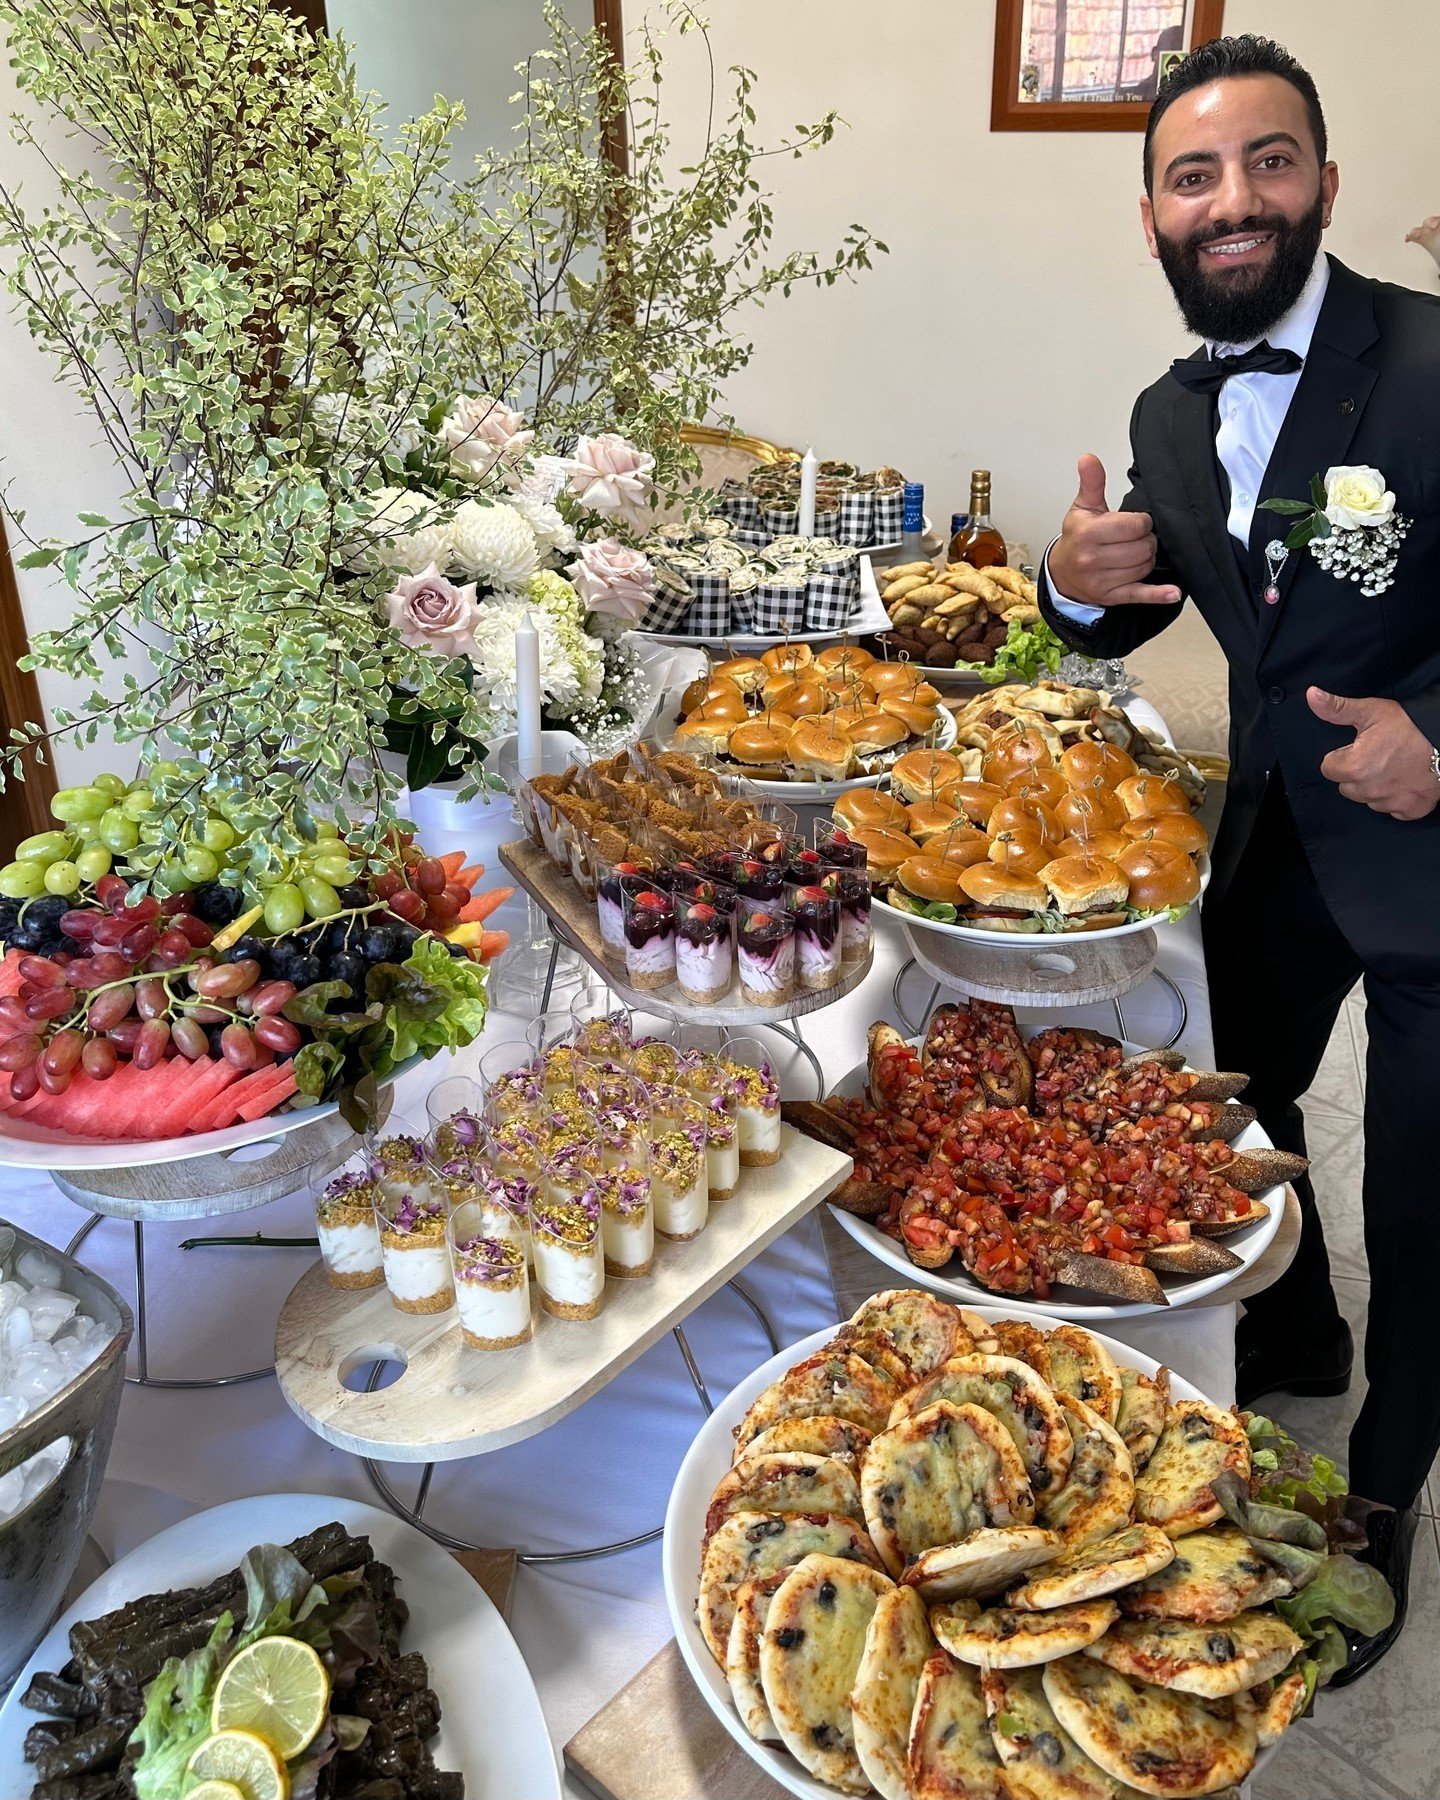 Let our team make your special day unforgettable with traditional, authentic dishes that wow your guests! Visit our website to view our menu and enquire within for your next event 🎉

#weddingcatering #lebanesecuisine #Lebanesecatering #lebanesefood 